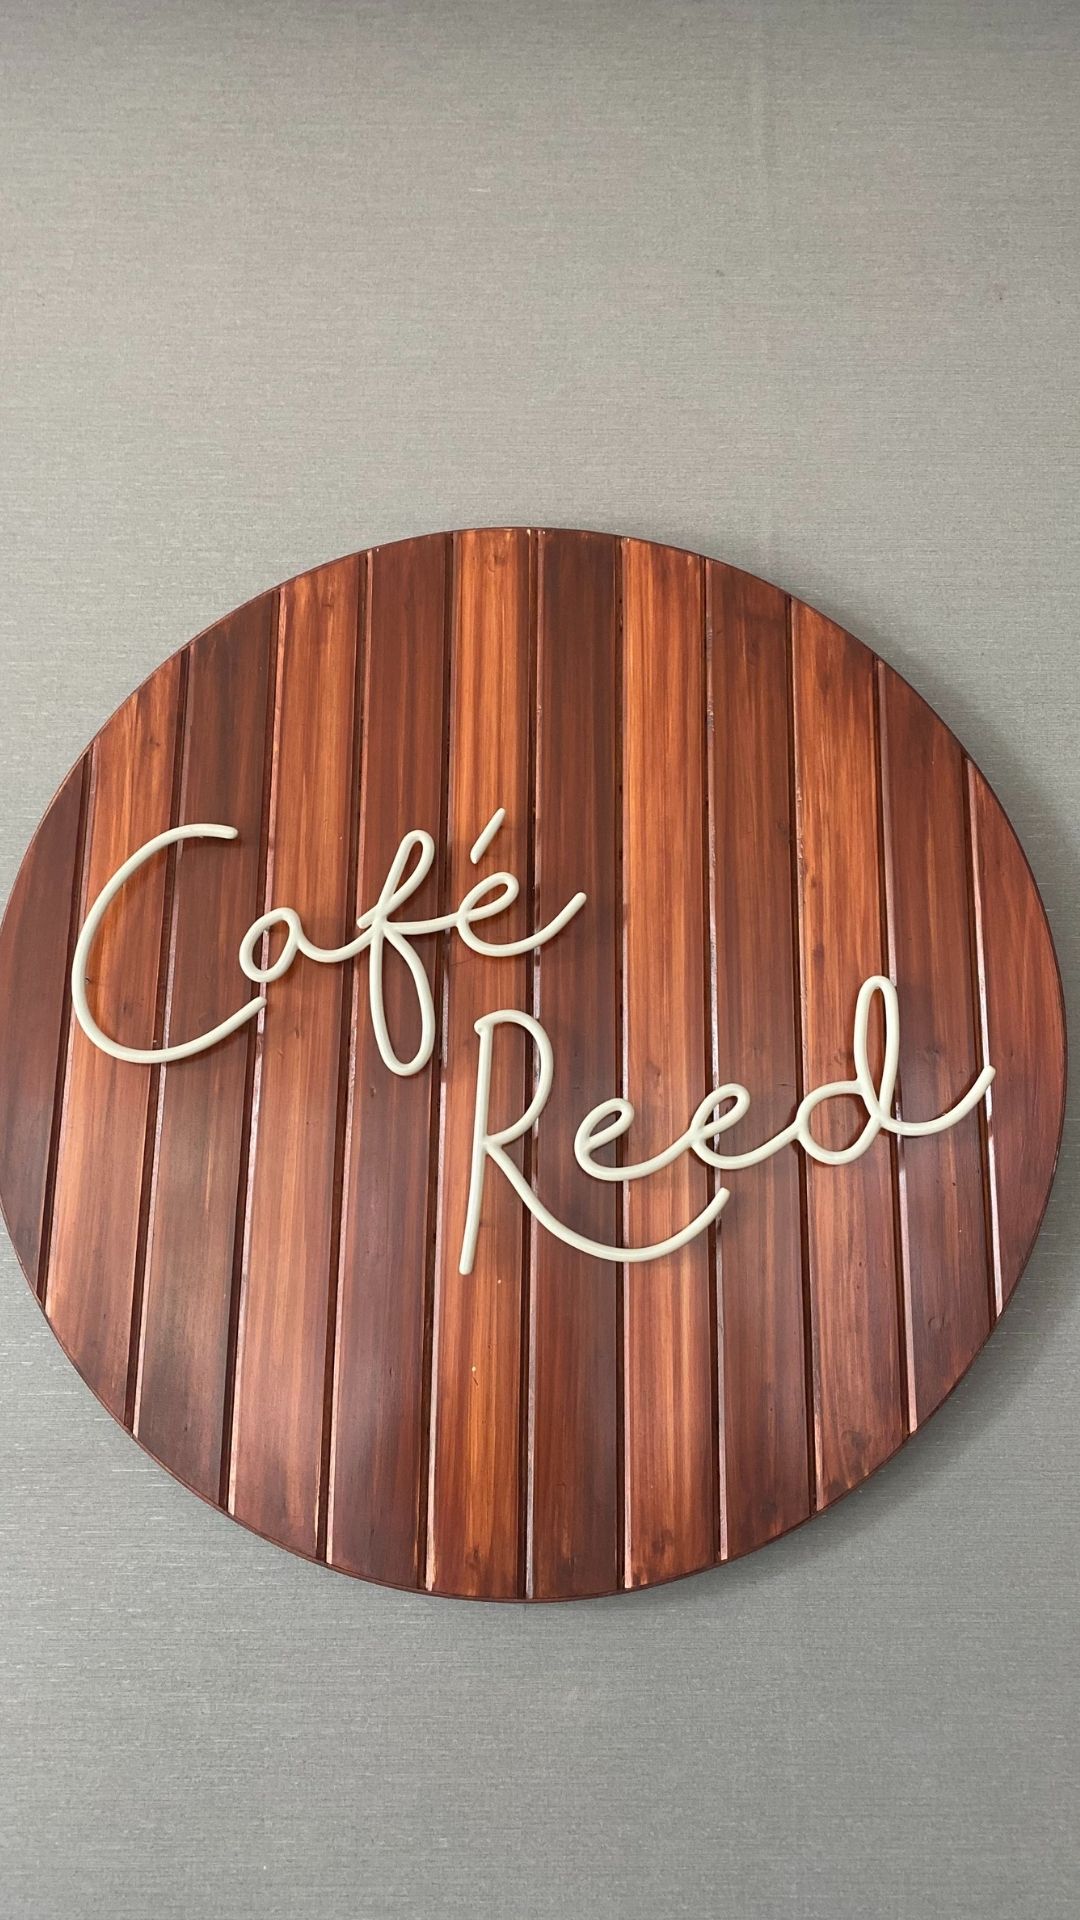 Cafe Reed at Quorum 